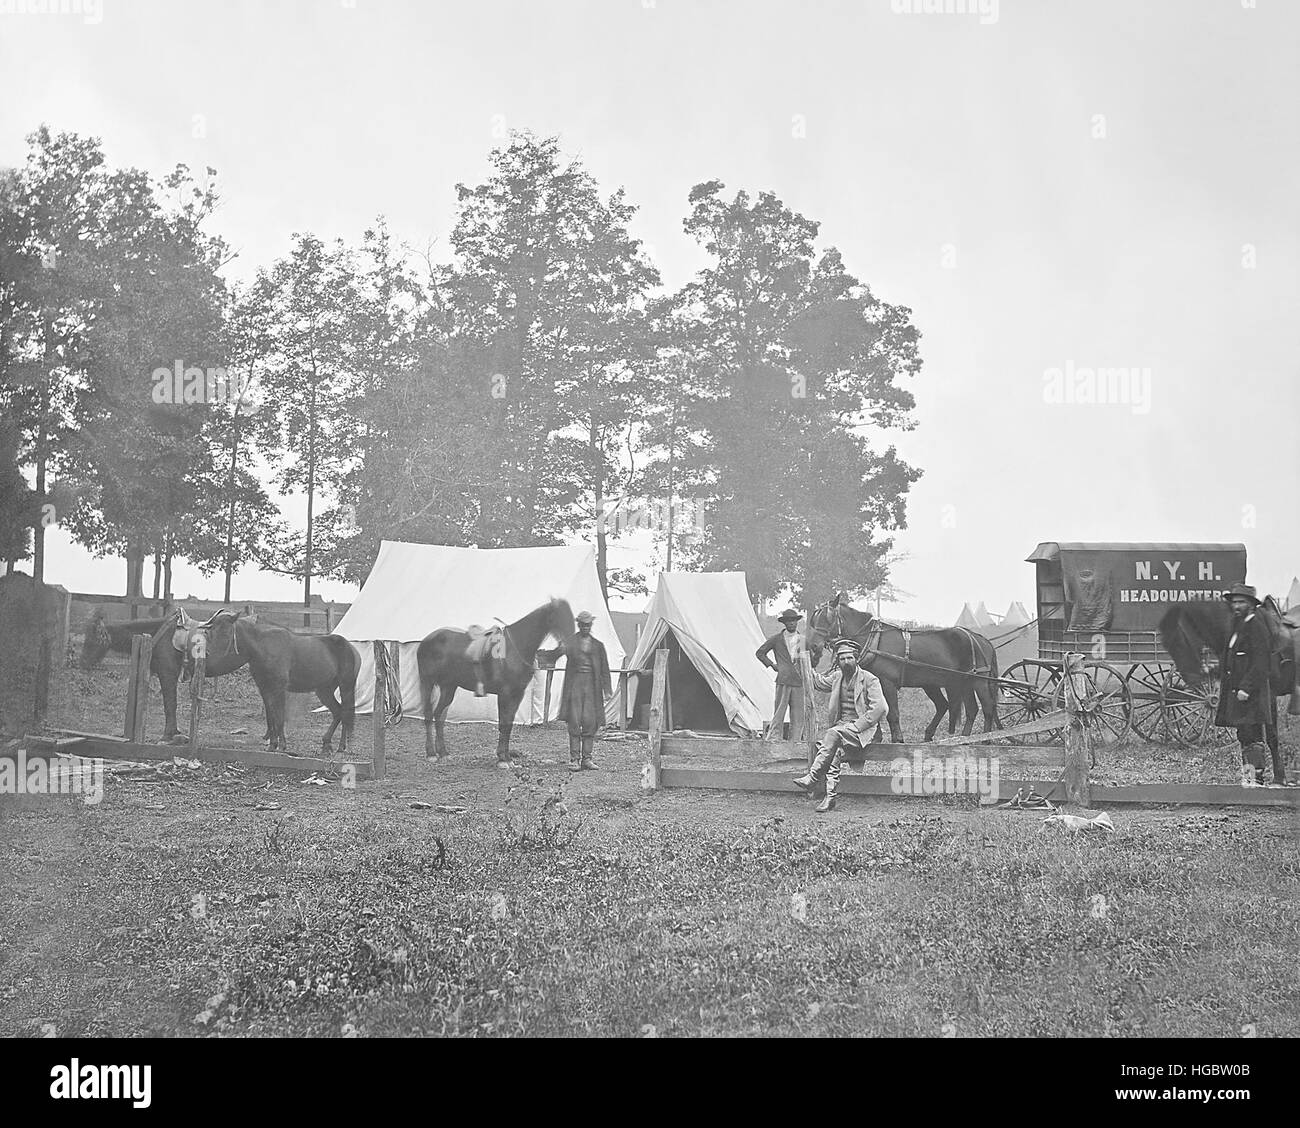 New York Herald Headquarters in the field during American Civil War. Stock Photo